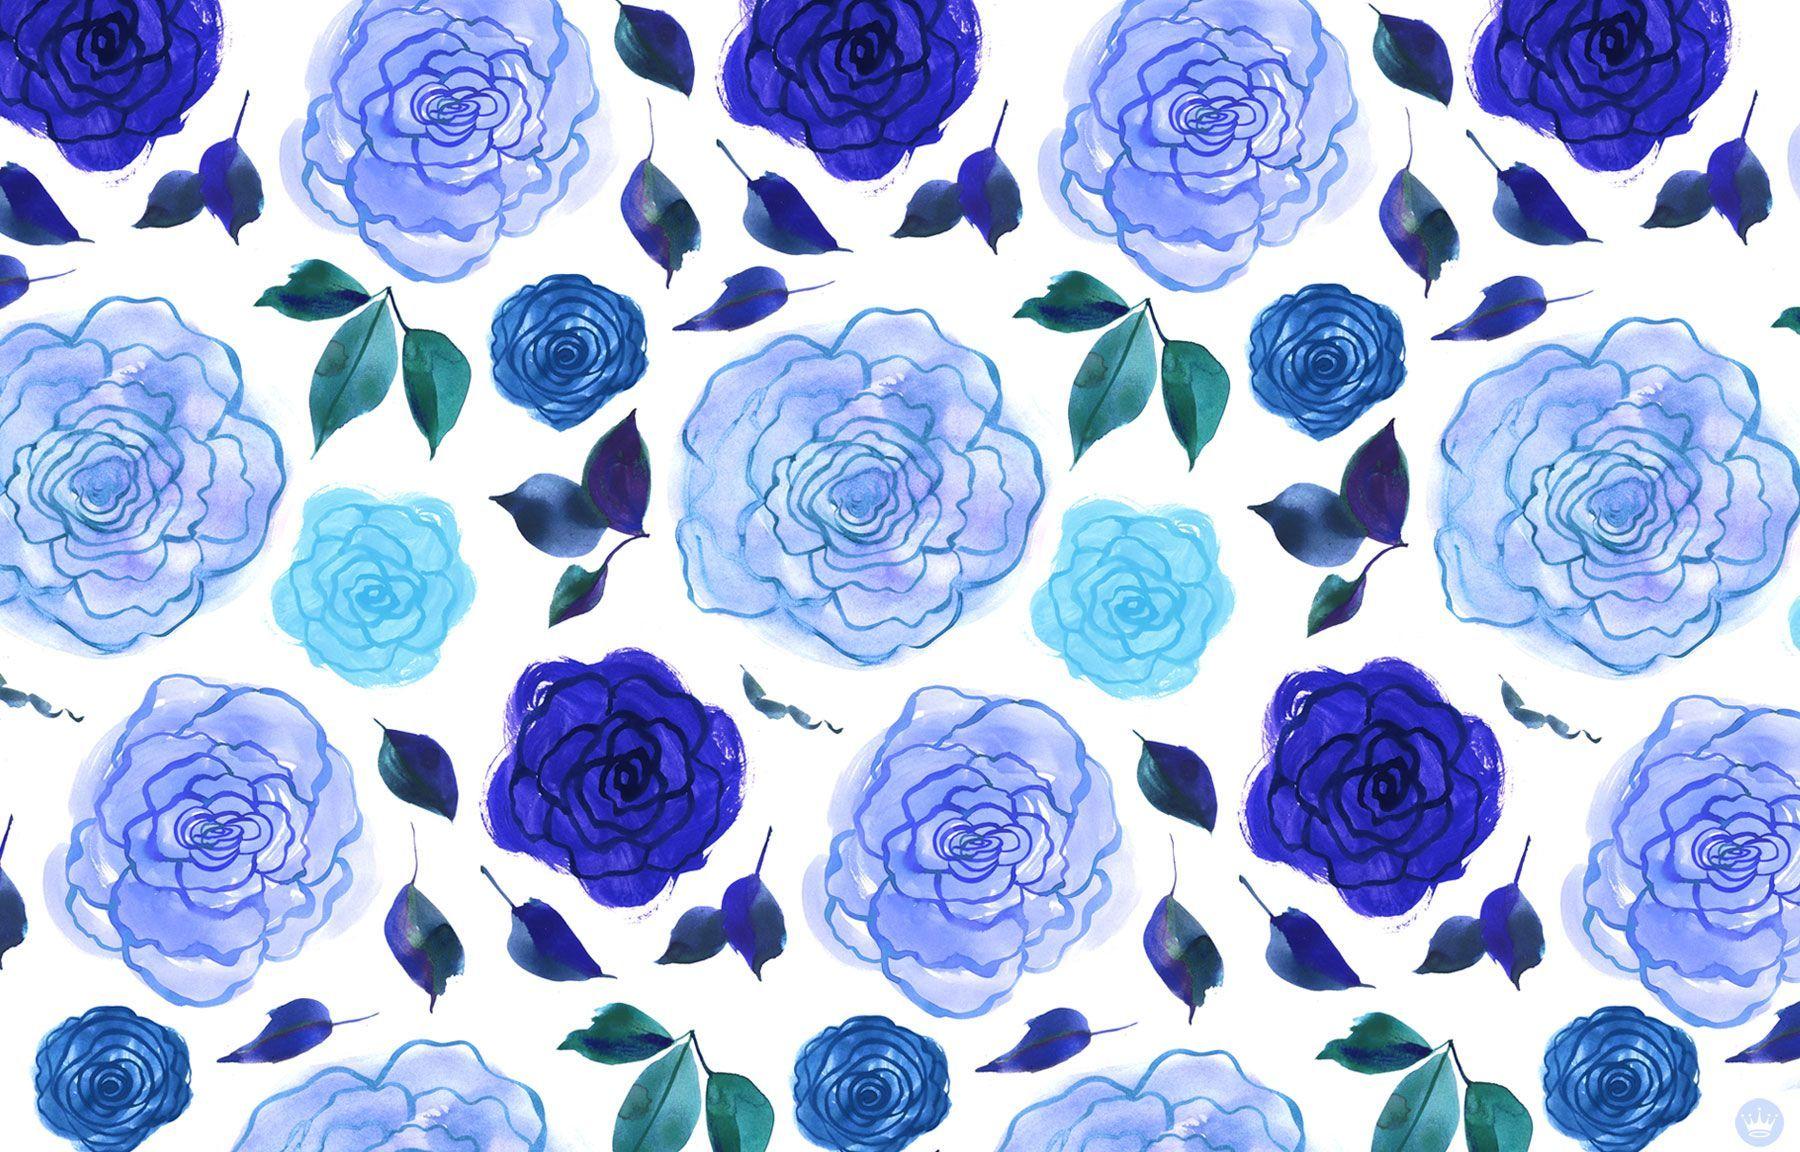 Aesthetic Blue Flower Wallpaper For Laptop Flower Hd Phone Wallpapers Download Free Background Images Collection High Quality Beautiful Flowers Wallpaper For Your Mobile Phone